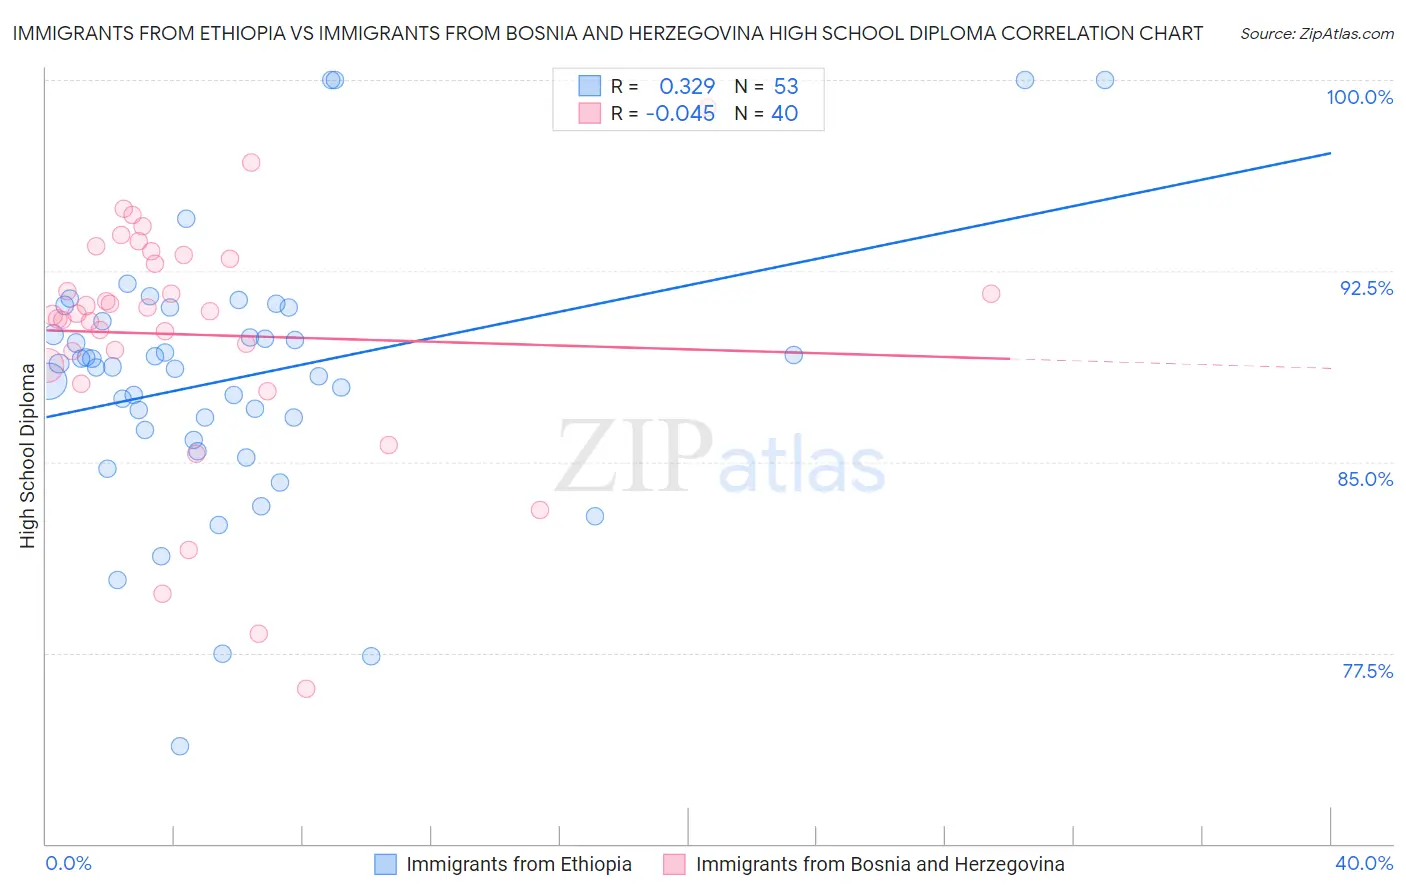 Immigrants from Ethiopia vs Immigrants from Bosnia and Herzegovina High School Diploma